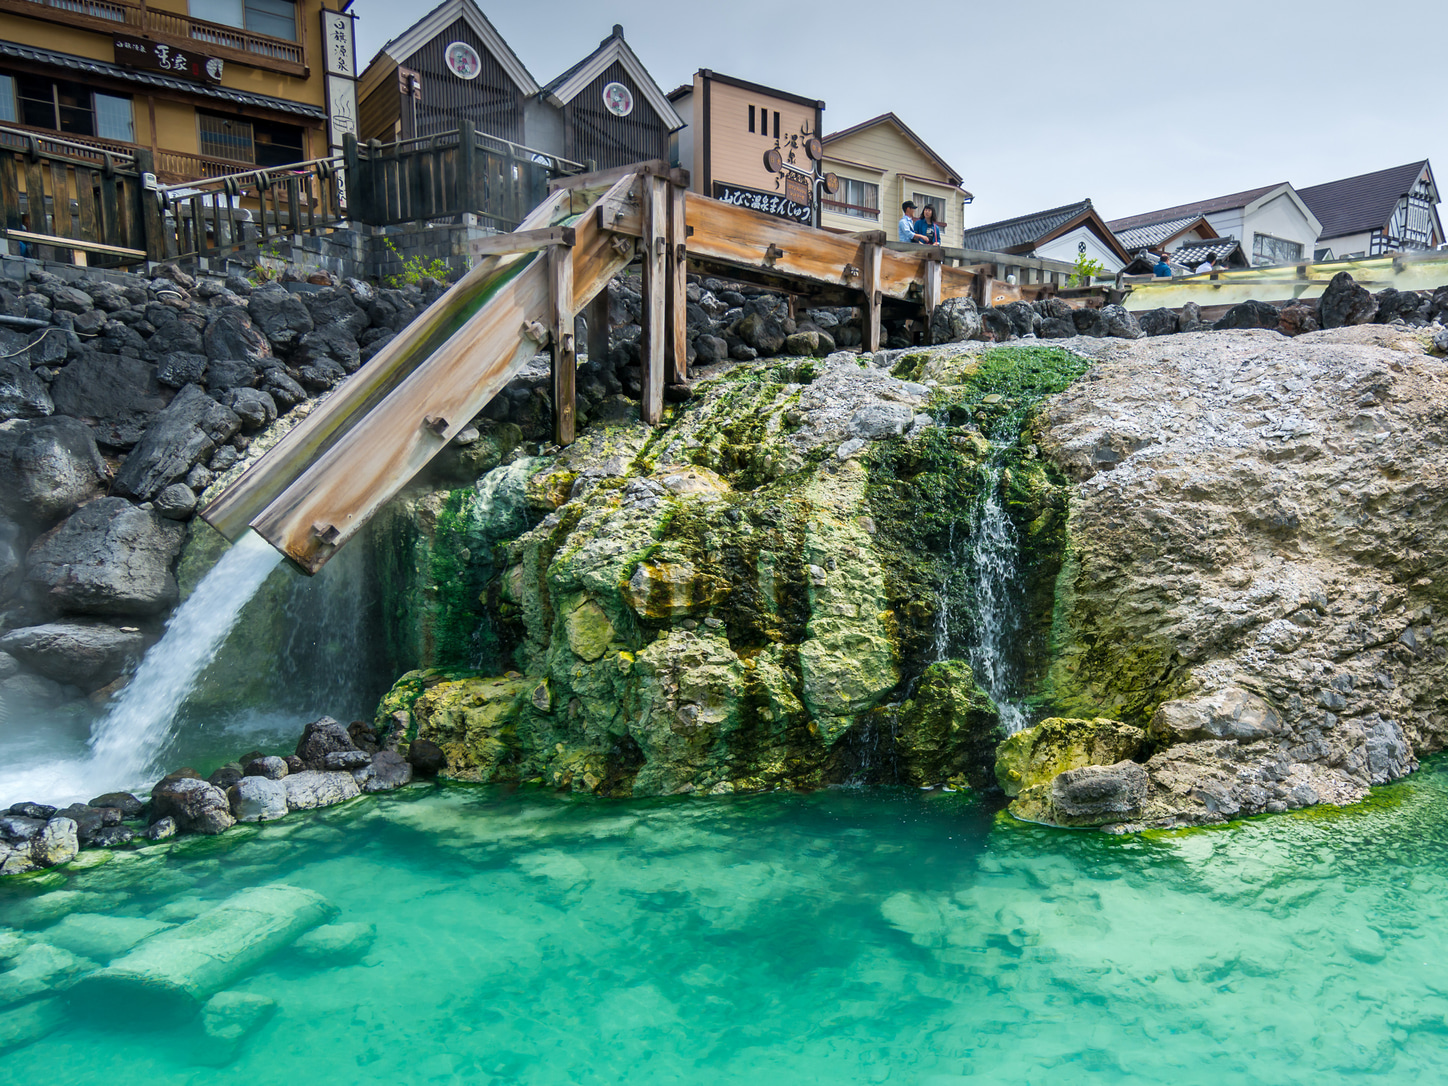 Guide to Kusatsu Onsen: A 3-Day Plan For Exploring Gunma’s Historic Town